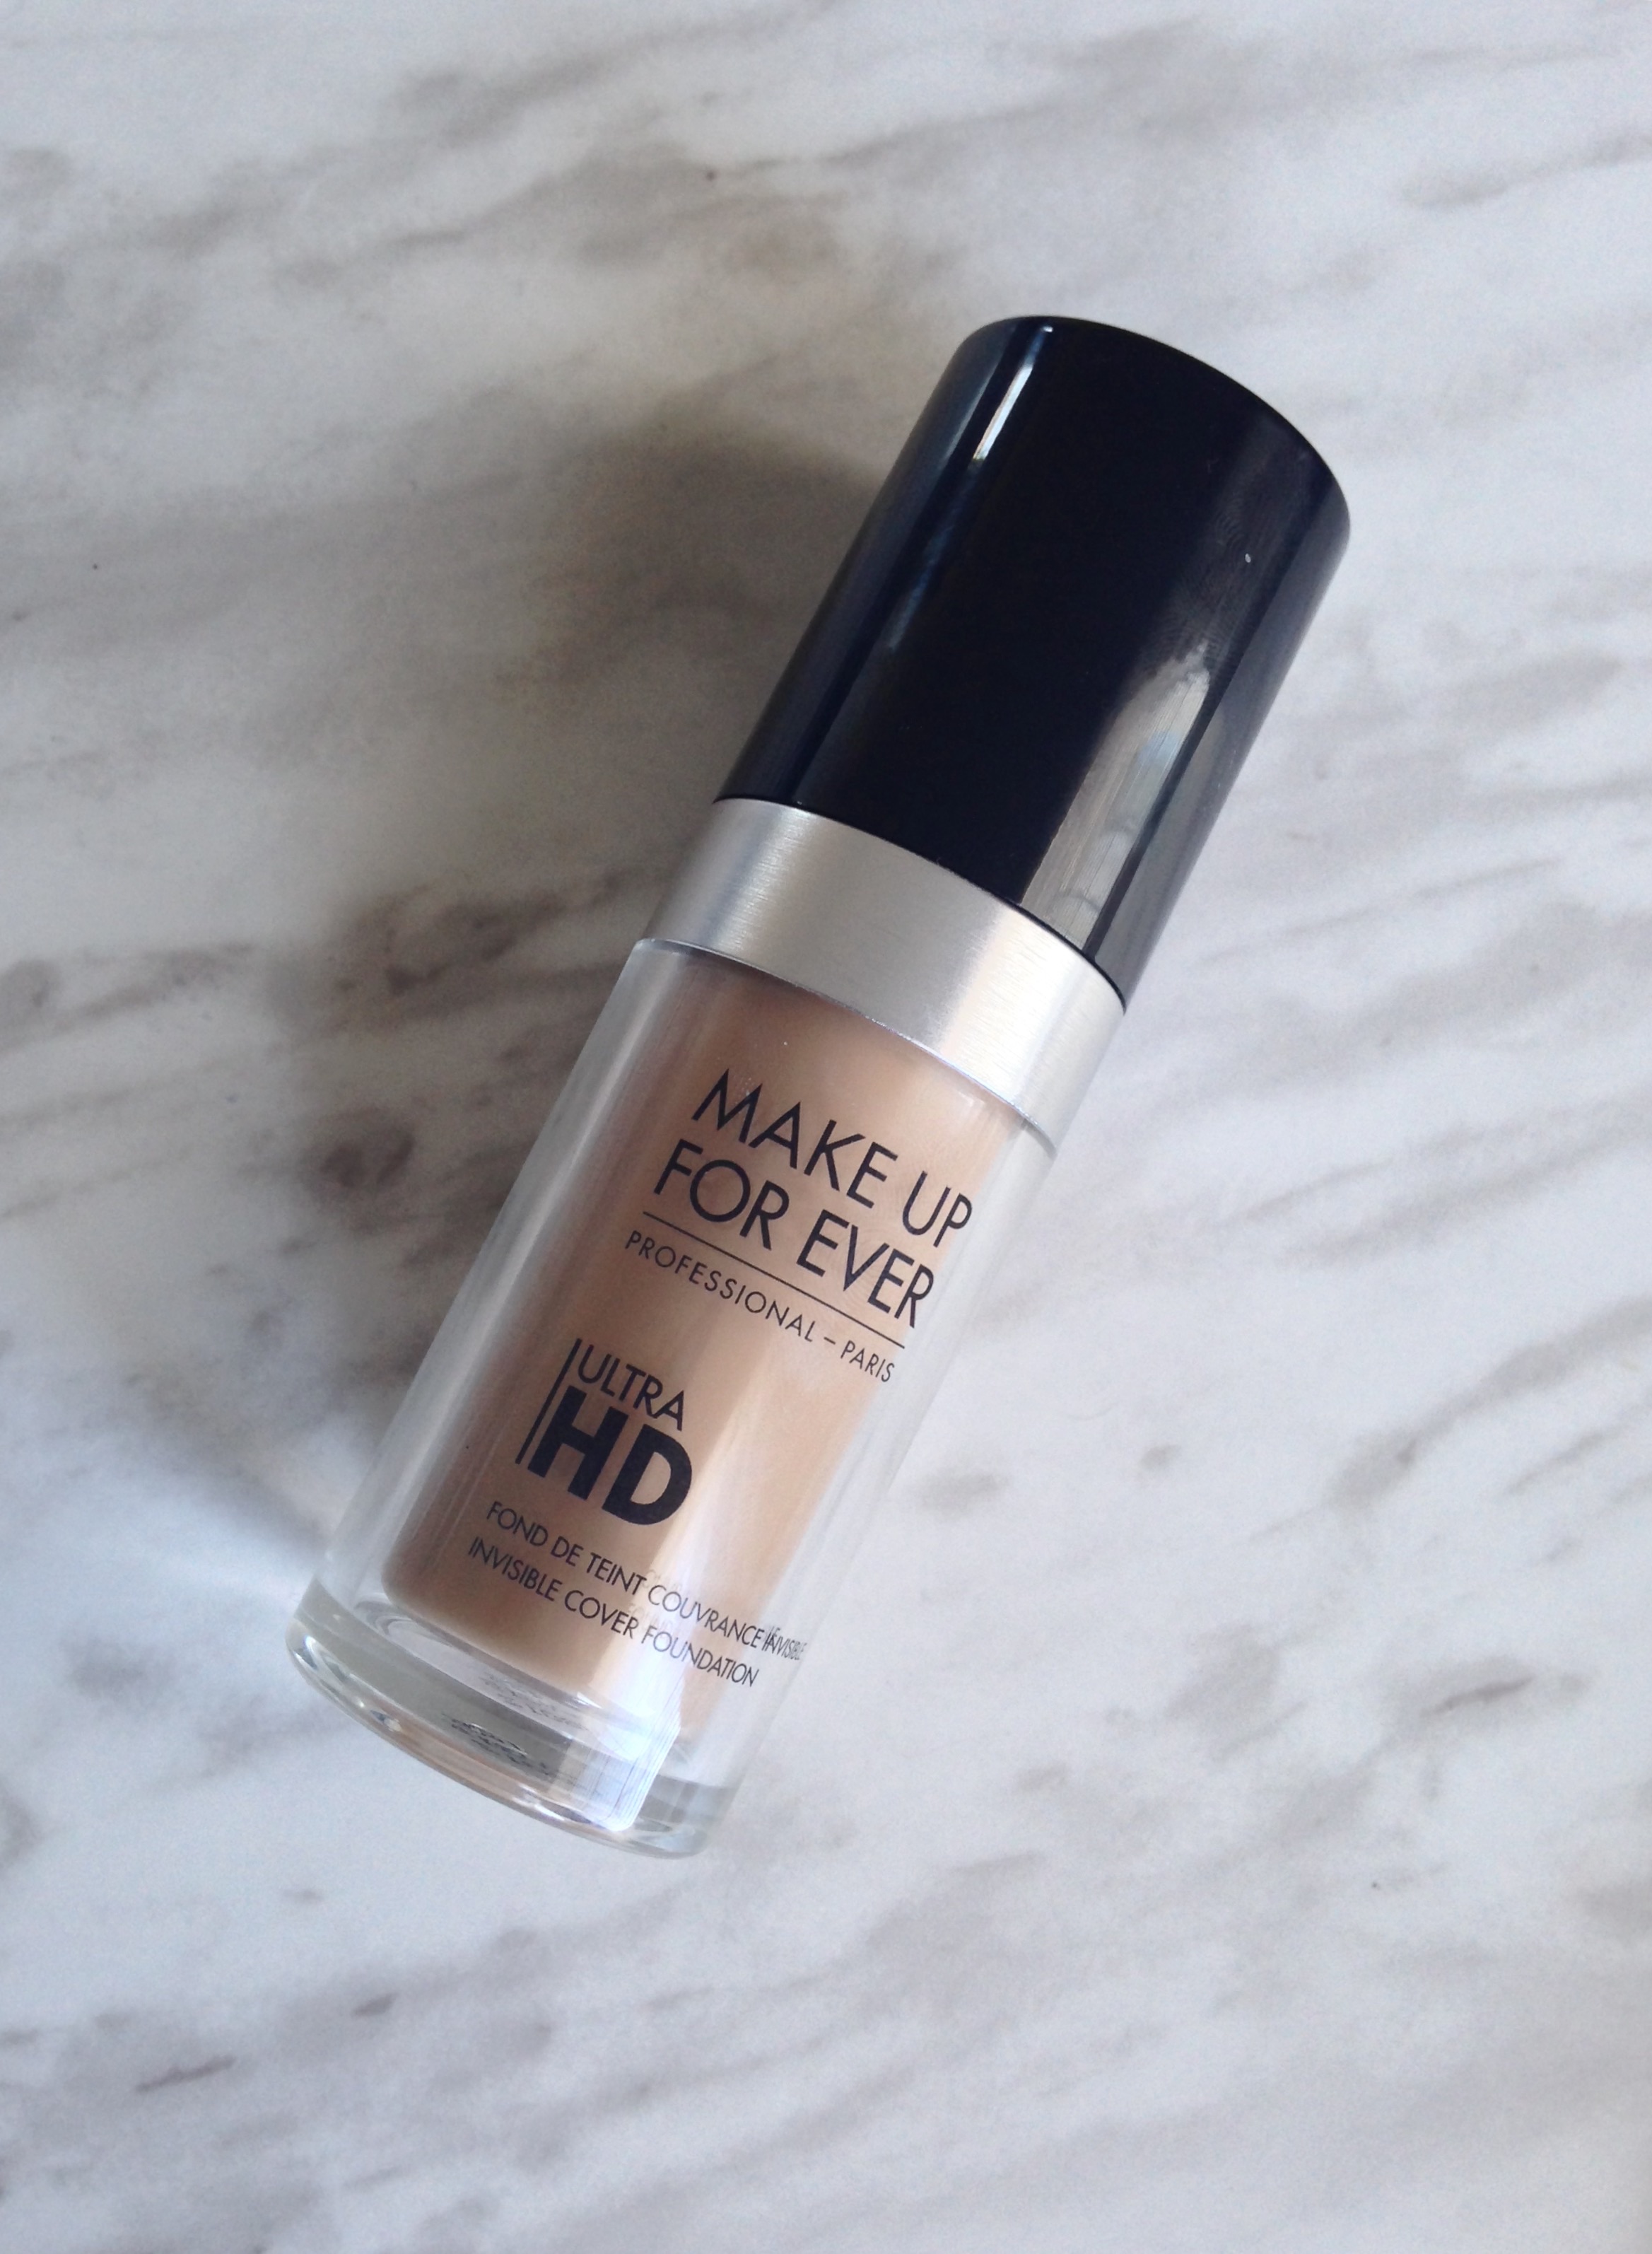 Ultra HD Liquid Foundation by MAKE UP FOR EVER, Color, Complexion, Foundation